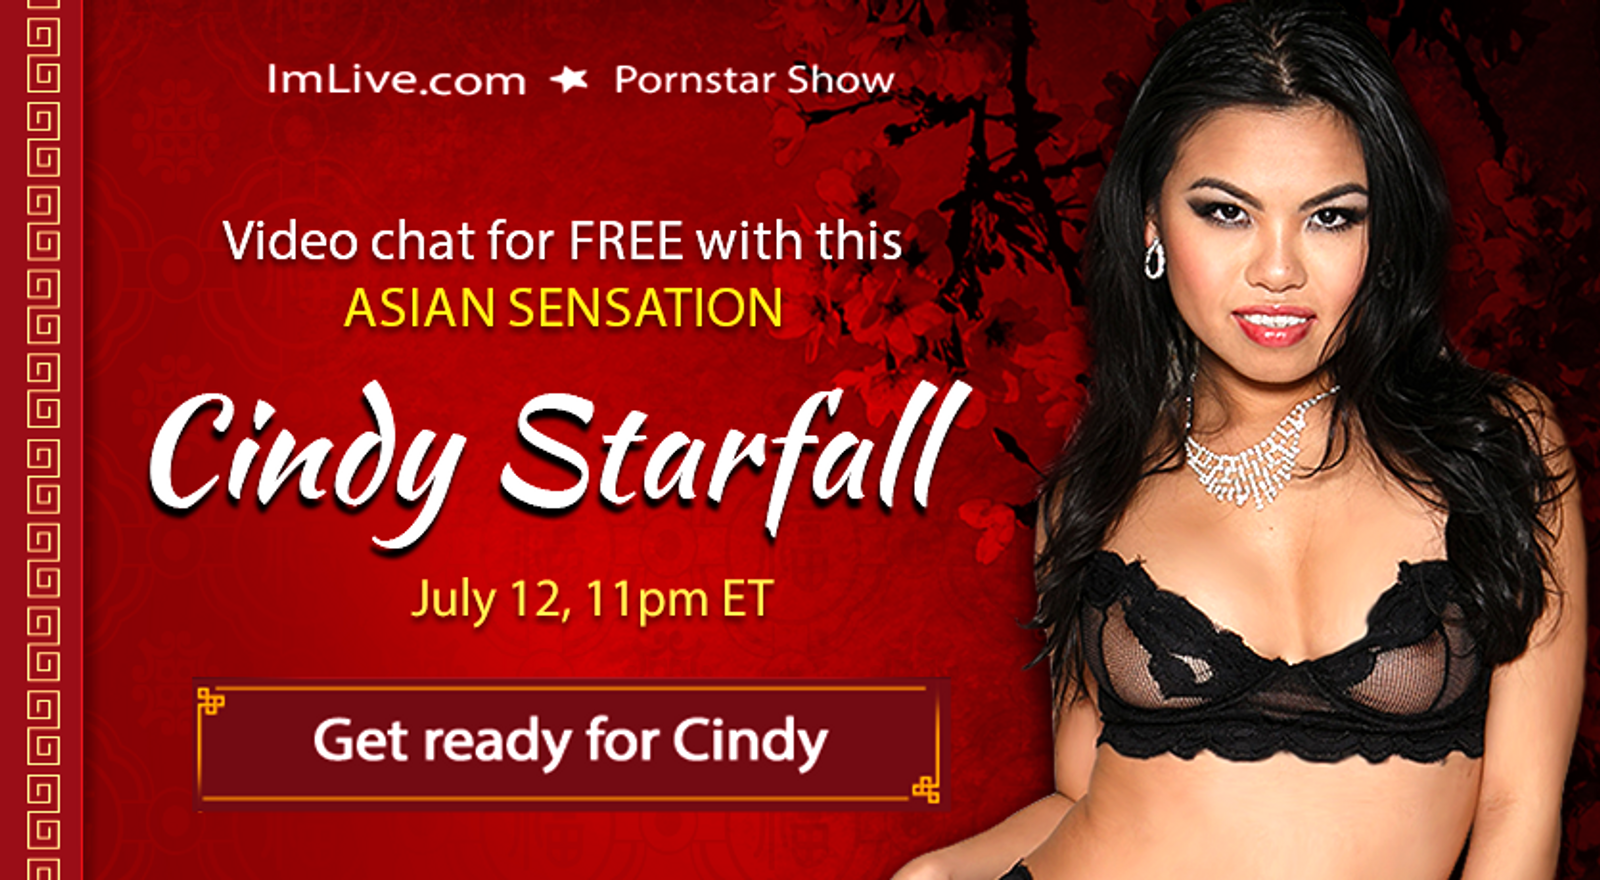 Cindy Starfall to Do Free Video Chat on ImLIve